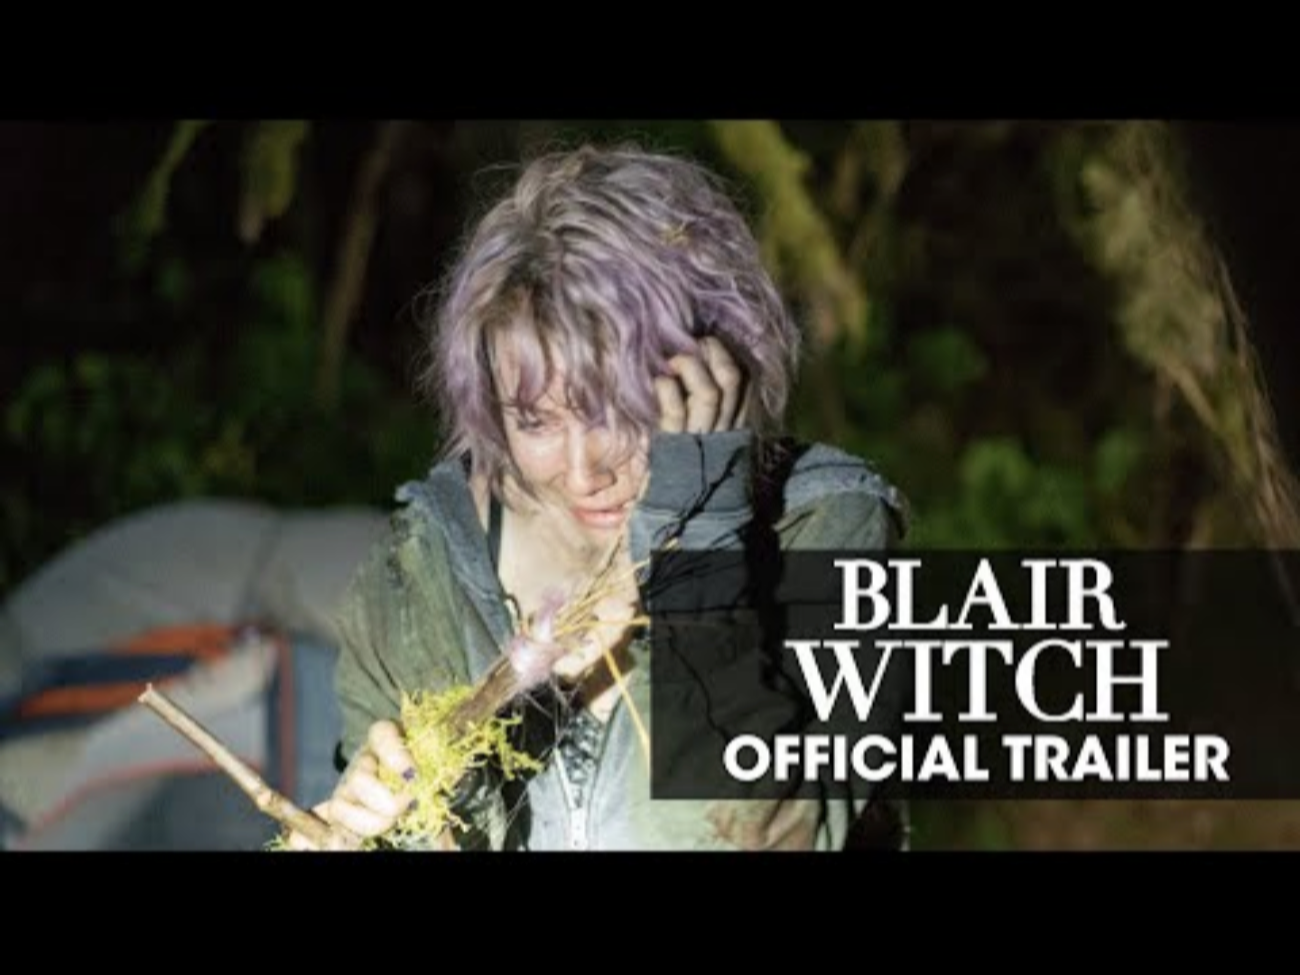 Official Trailer Film Blair Witch. (Foto: Box Office Mojo)